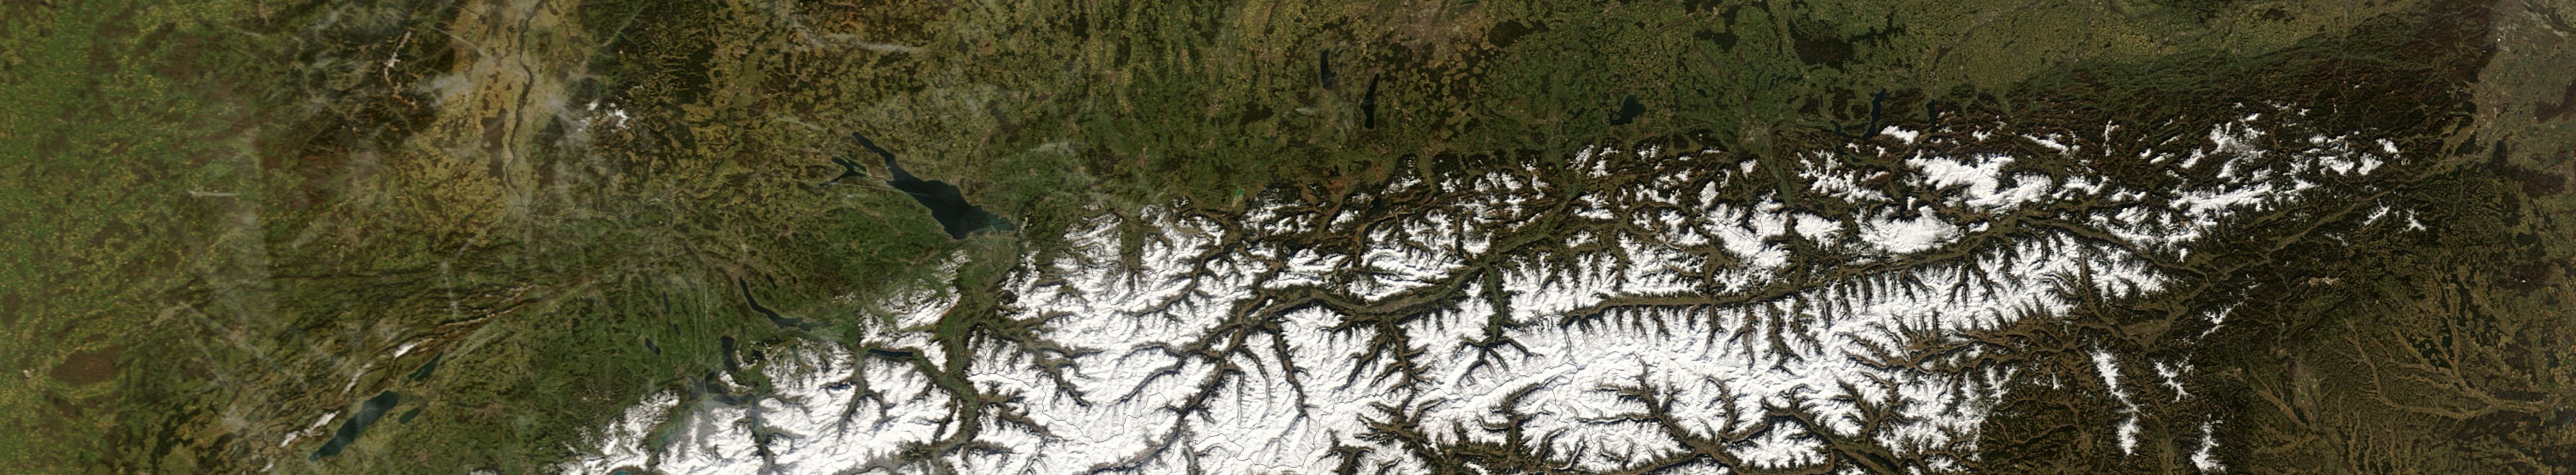 The Alps as seen from a satellite